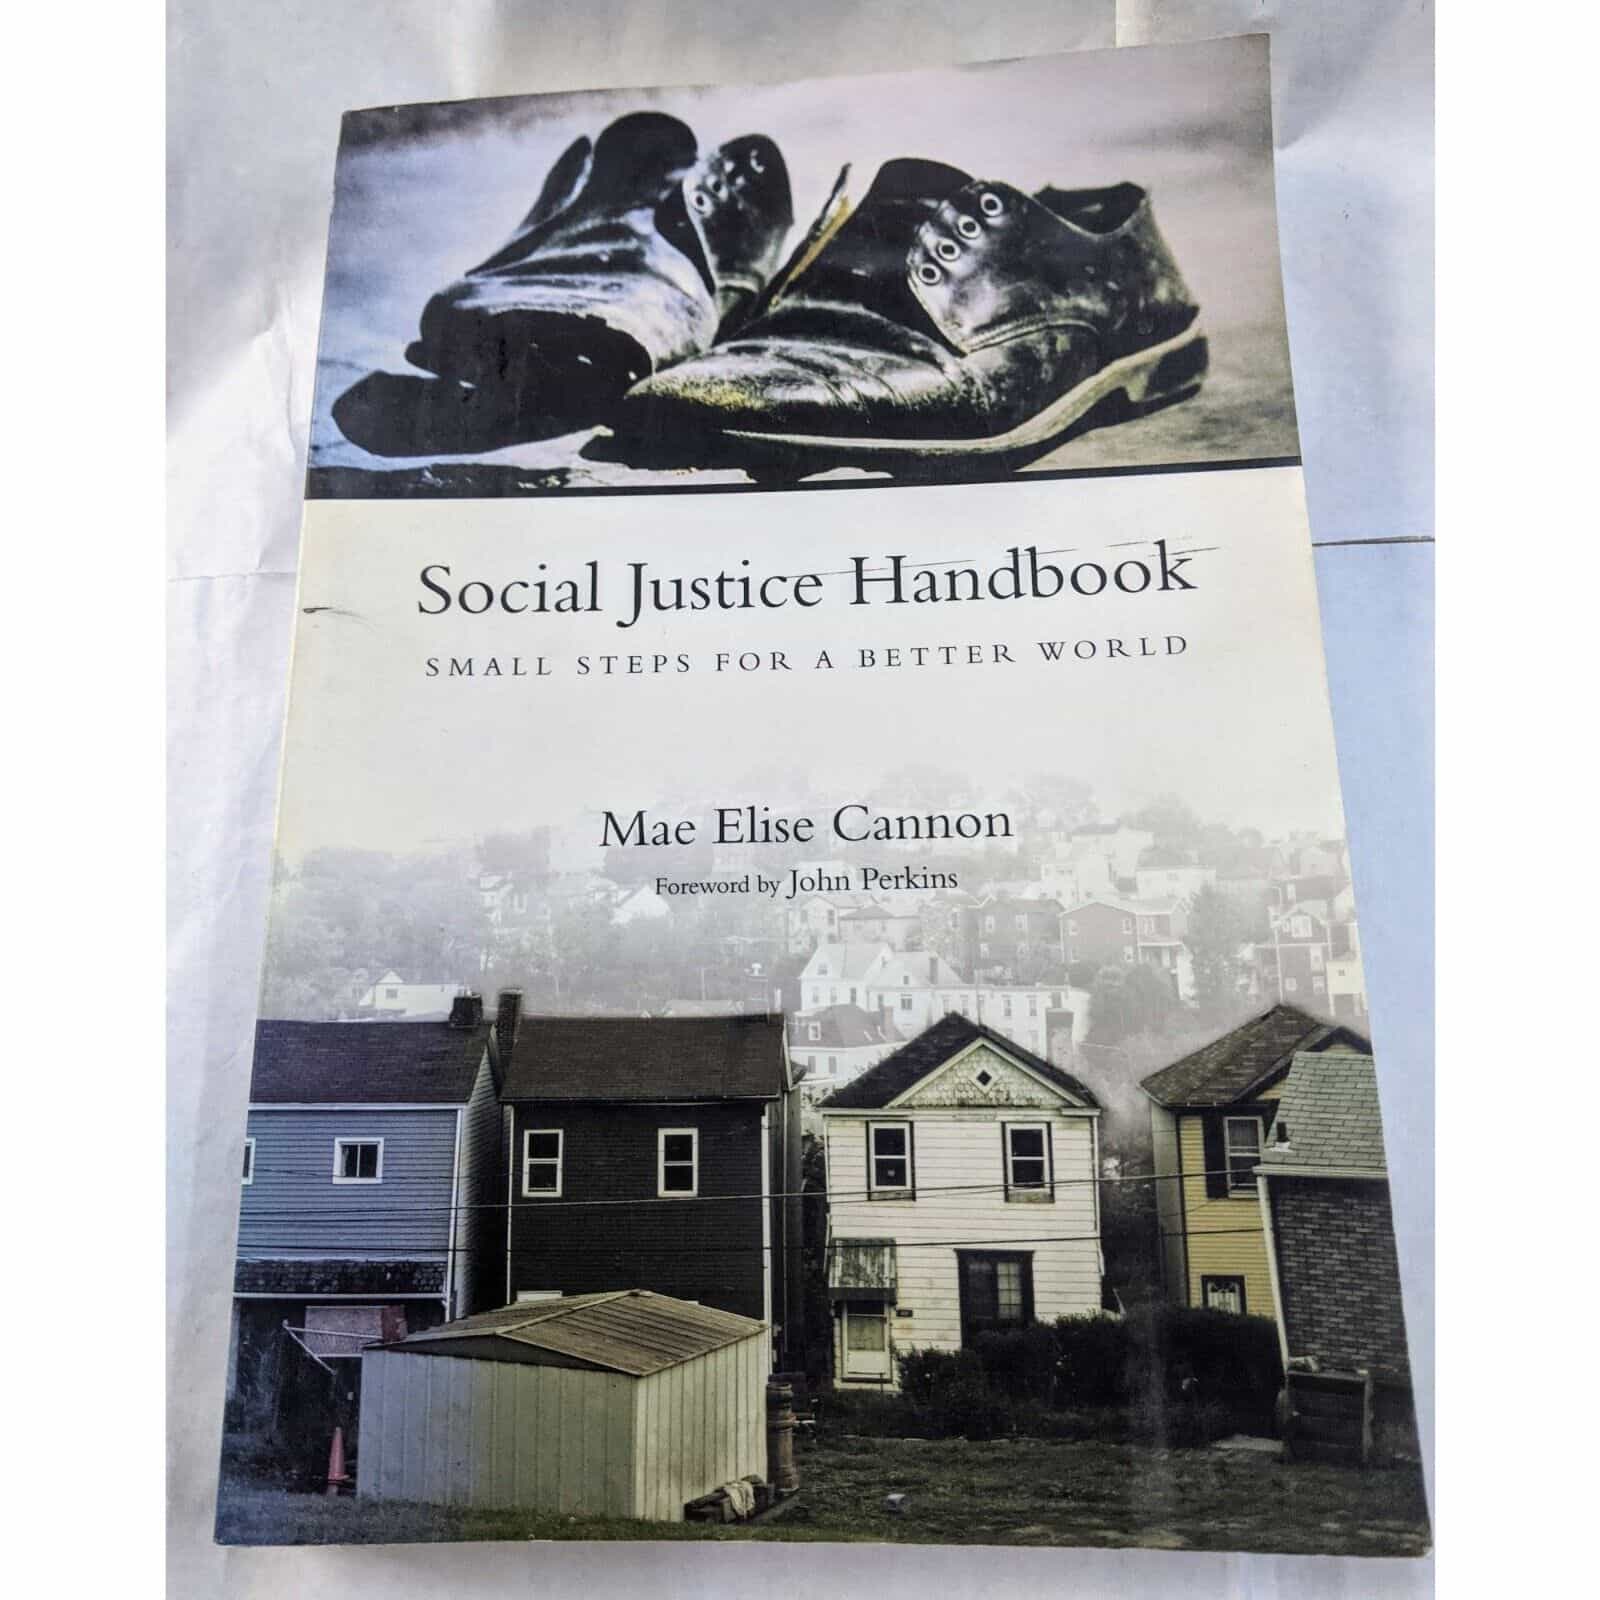 Social Justice Handbook Small Steps For A Better World by Mae Elise Cannon